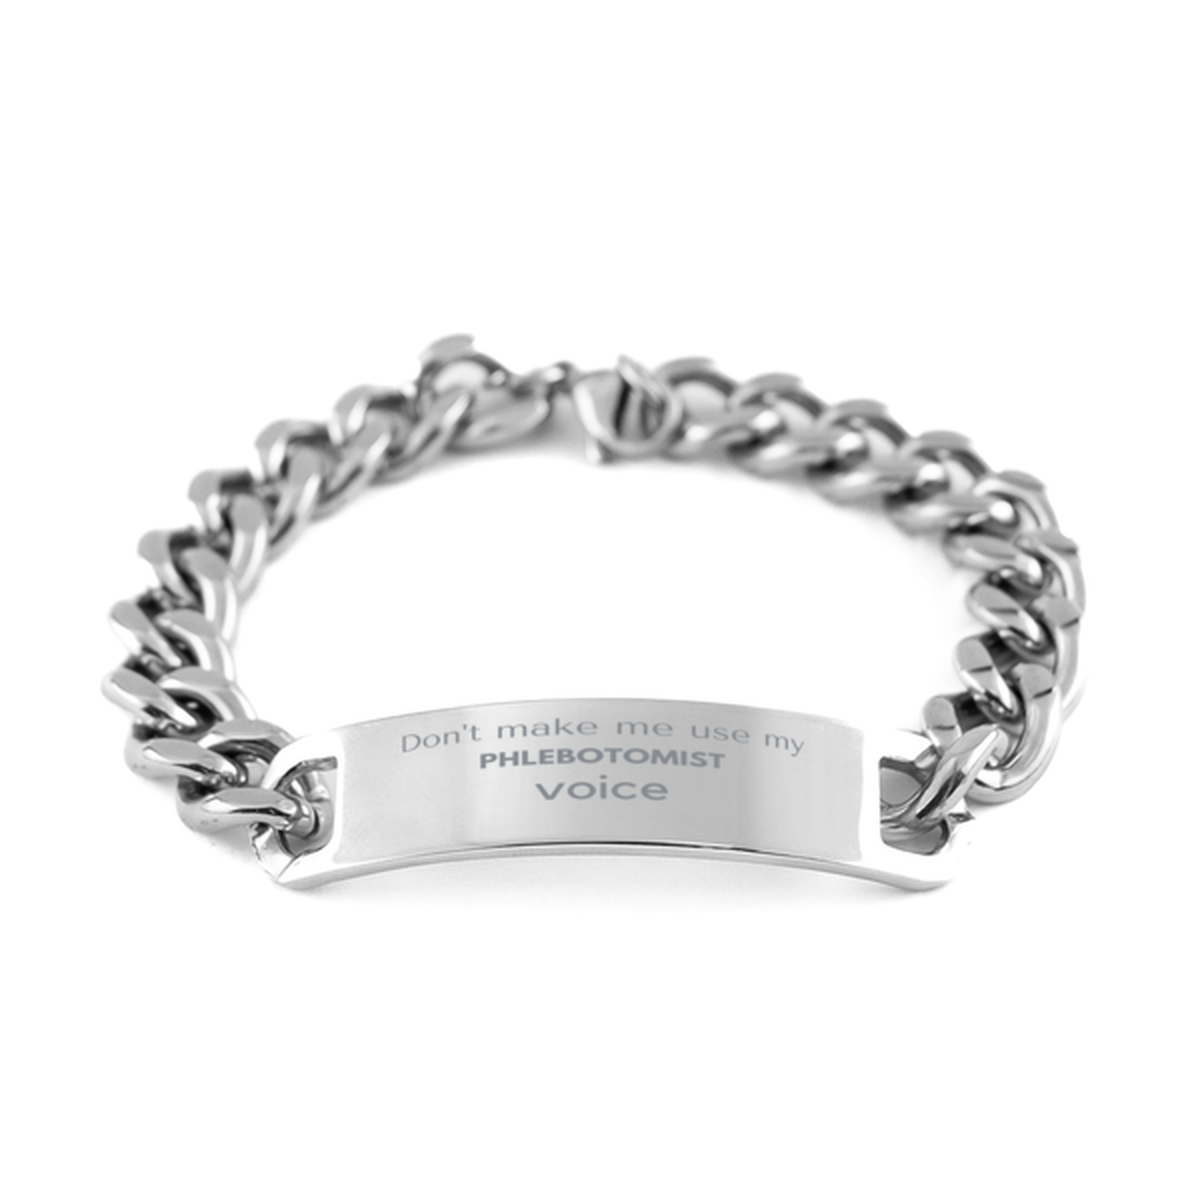 Don't make me use my Phlebotomist voice, Sarcasm Phlebotomist Gifts, Christmas Phlebotomist Cuban Chain Stainless Steel Bracelet Birthday Unique Gifts For Phlebotomist Coworkers, Men, Women, Colleague, Friends